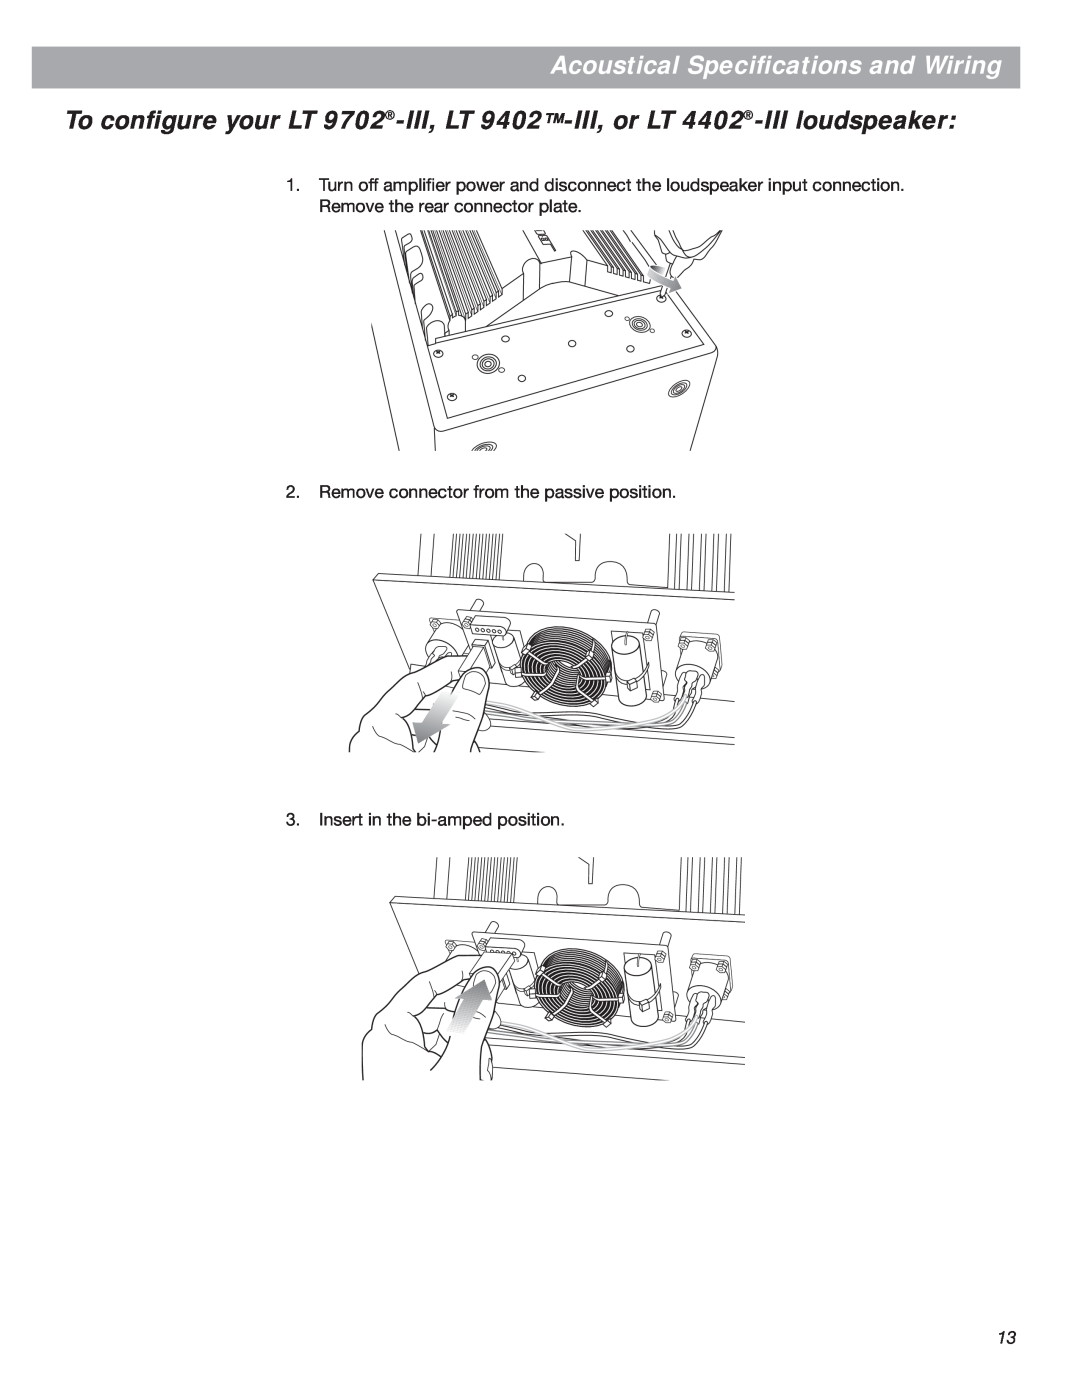 Bose Bose Panaray Loudspeakers manual Acoustical Speciﬁcations and Wiring, Remove connector from the passive position 